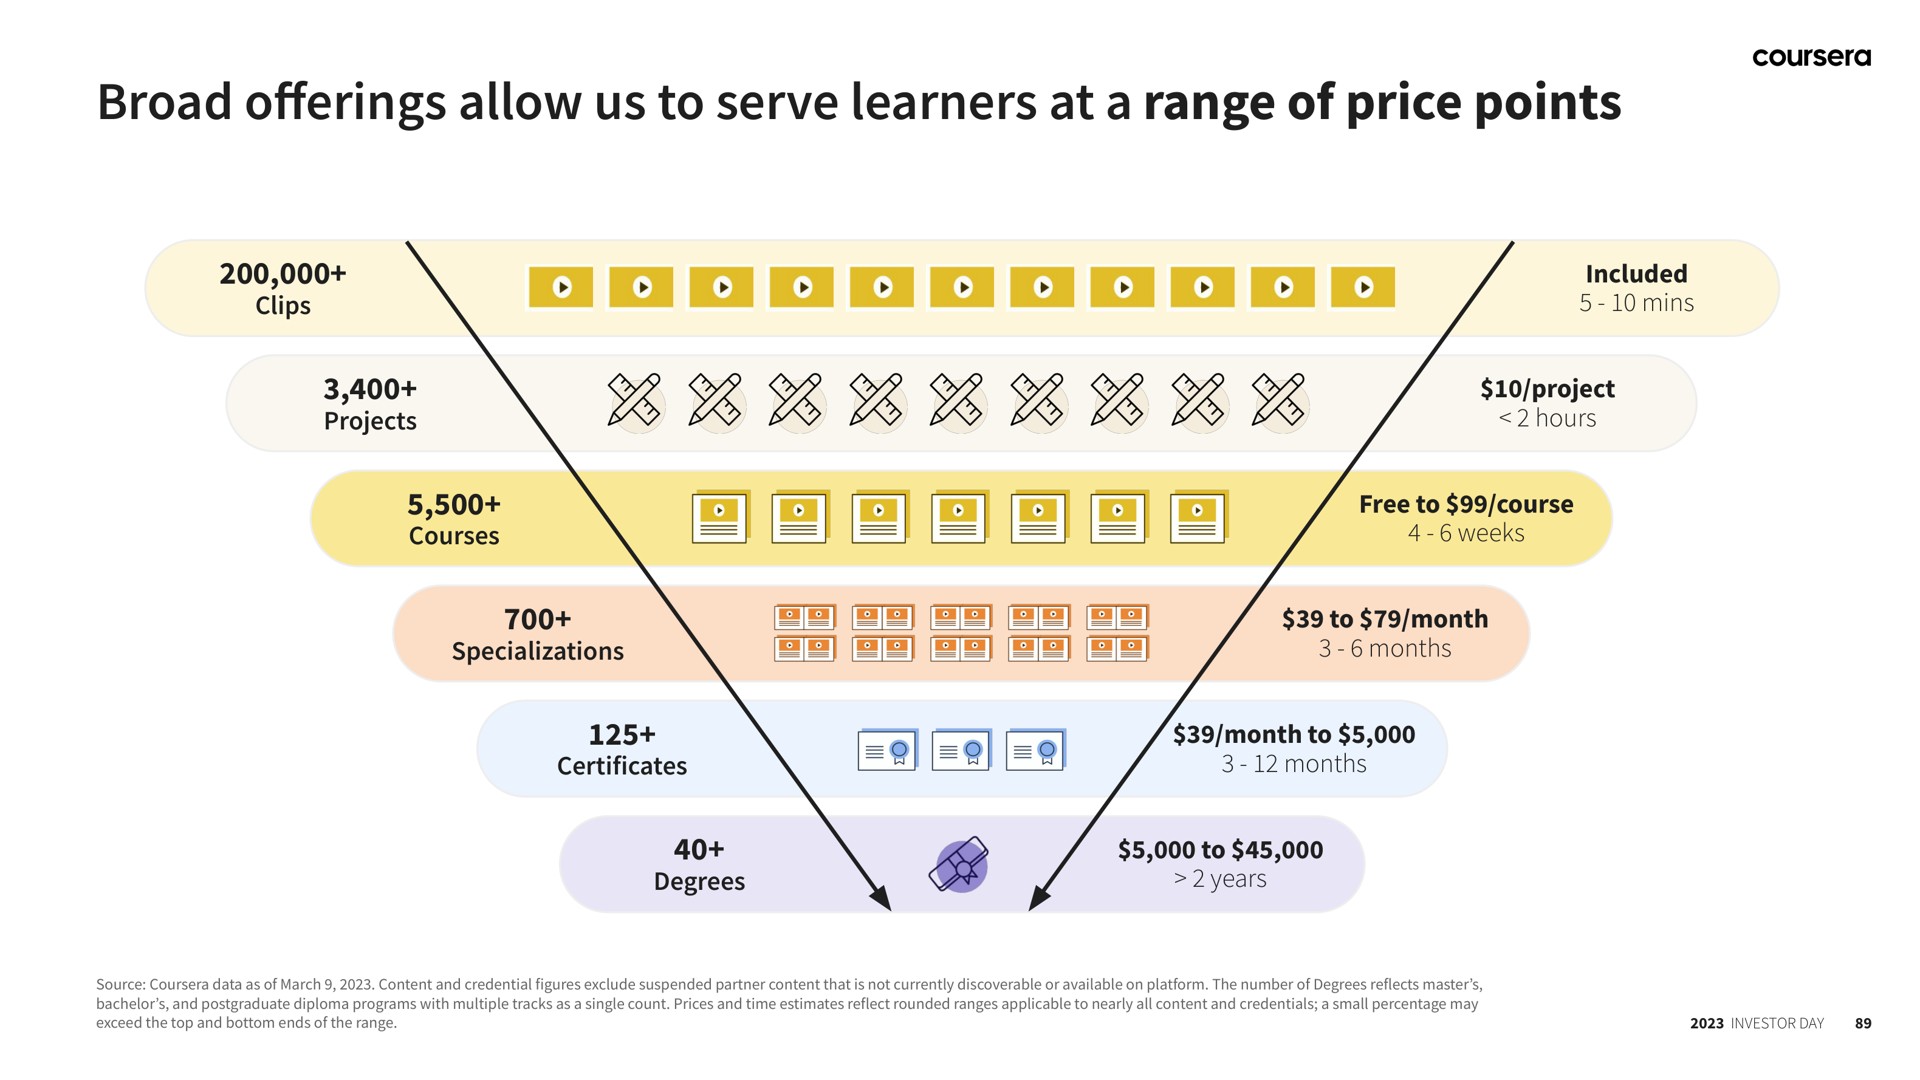 broad allow us to serve learners at a range of price points offerings | Coursera